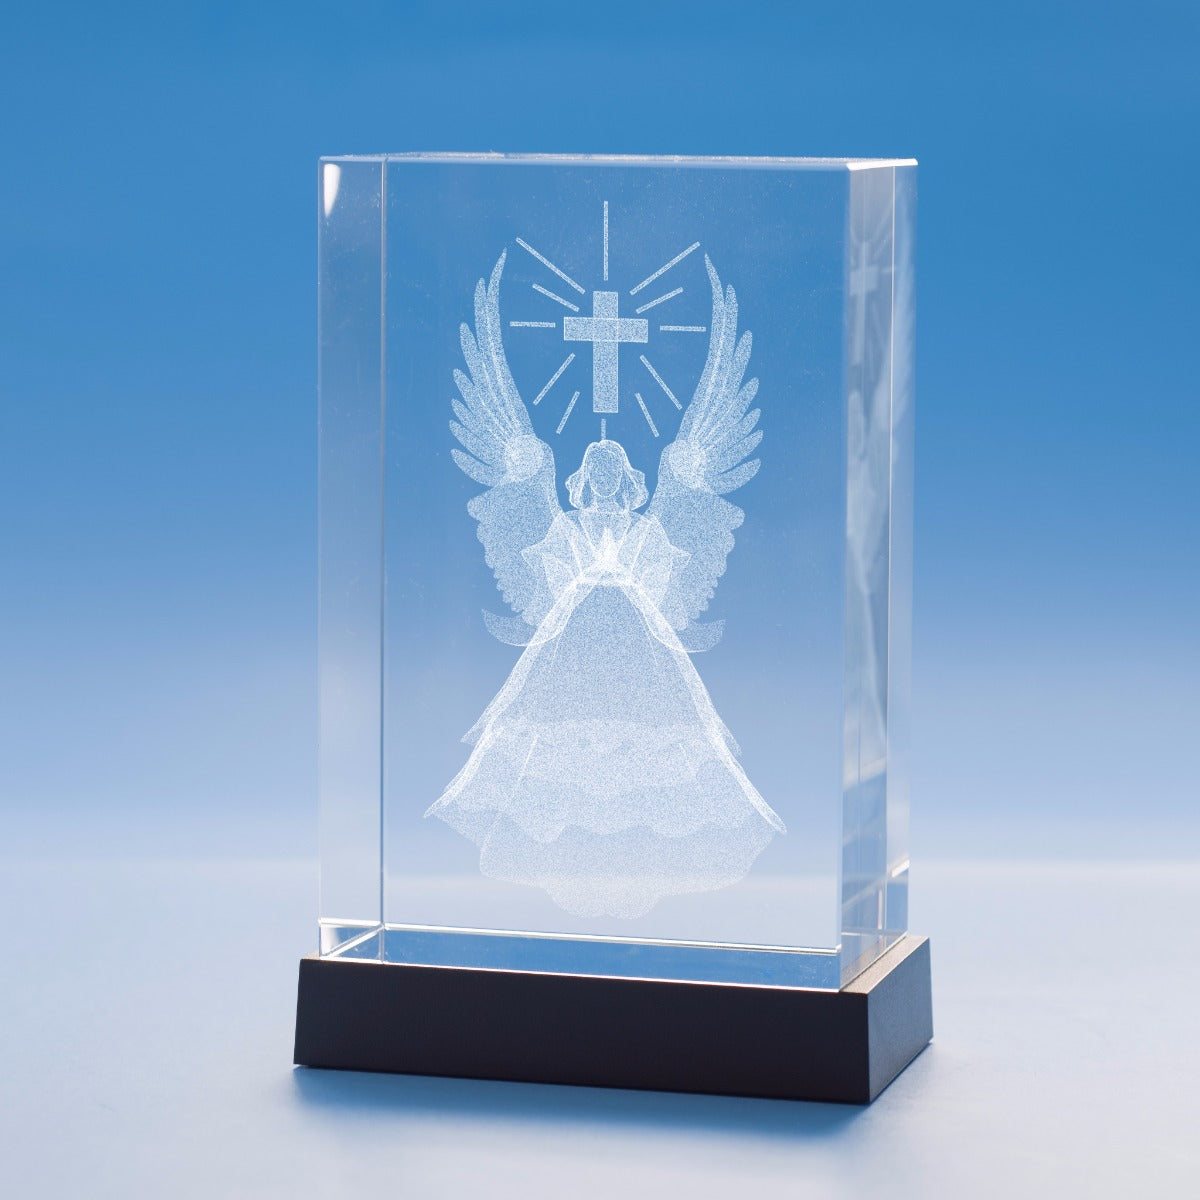 Angel Wings Religious Designs Tower Crystal, 3D Engraved